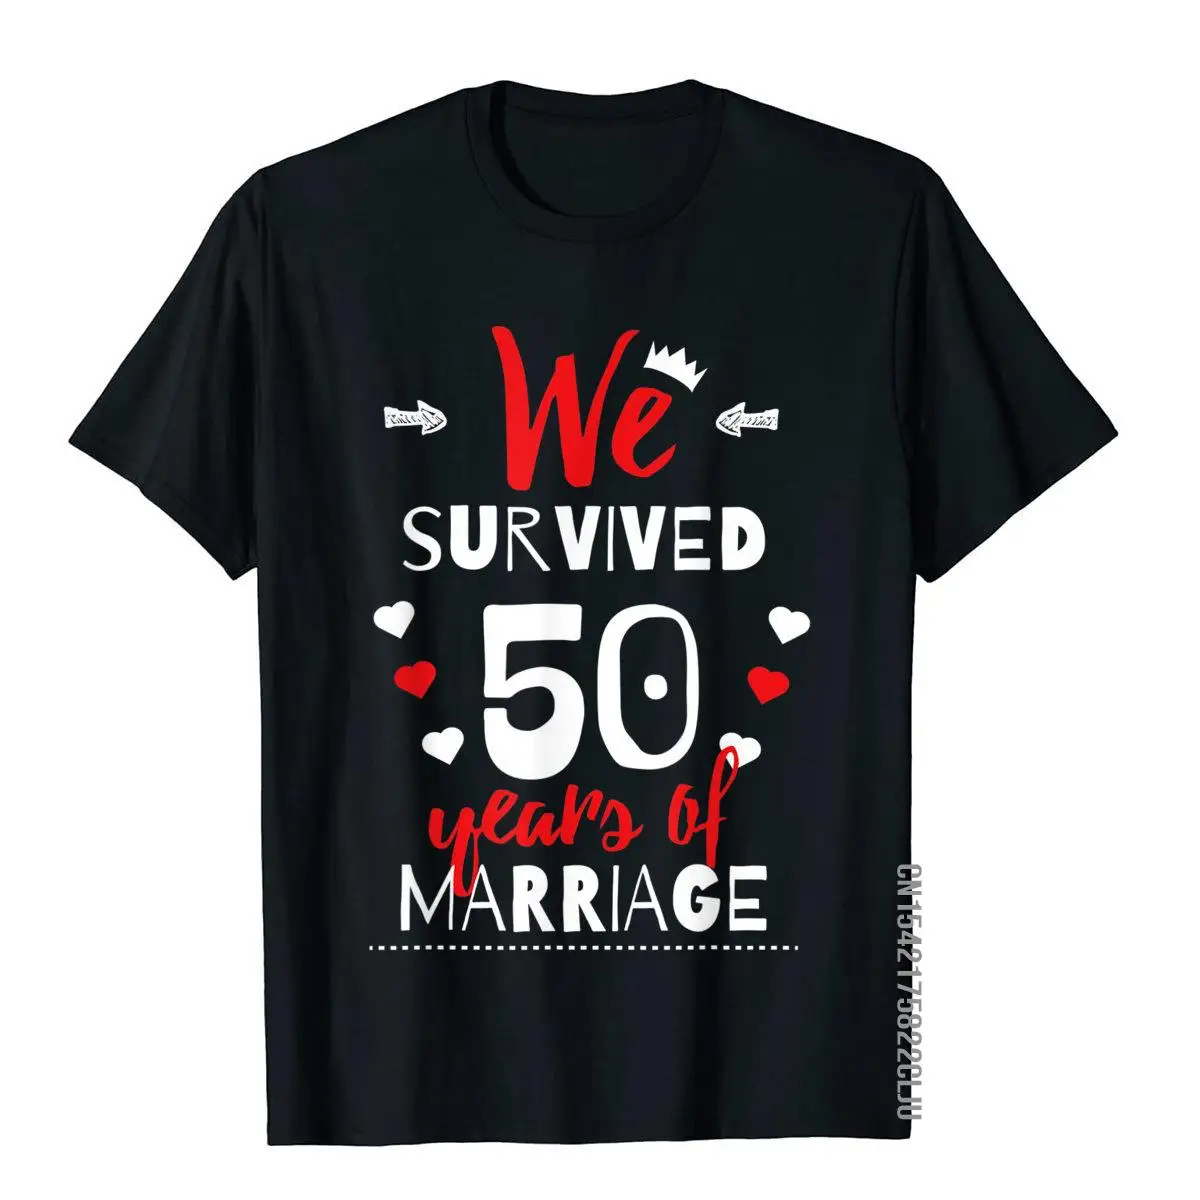 

Funny 50th Wedding Anniversary T-Shirt Gifts For Couples T Shirt Novelty Hot Sale Men Tops Shirts Classic Cotton